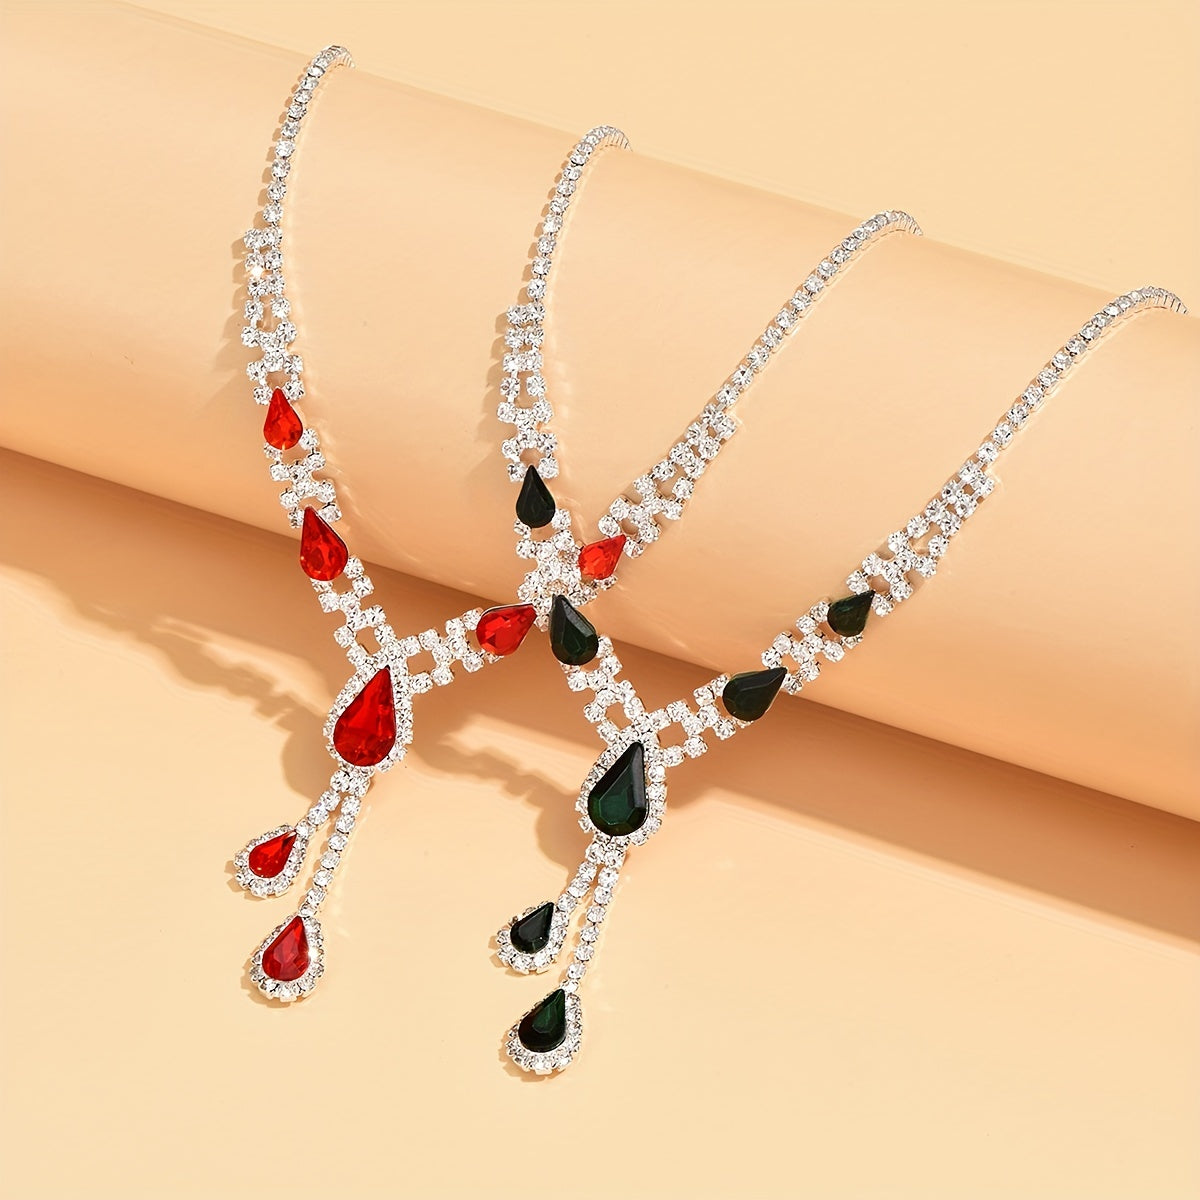 Elegant Rhinestone Jewelry Set for Women - Perfect Mother's Day Gift with Pendant Necklace and Drop Earrings